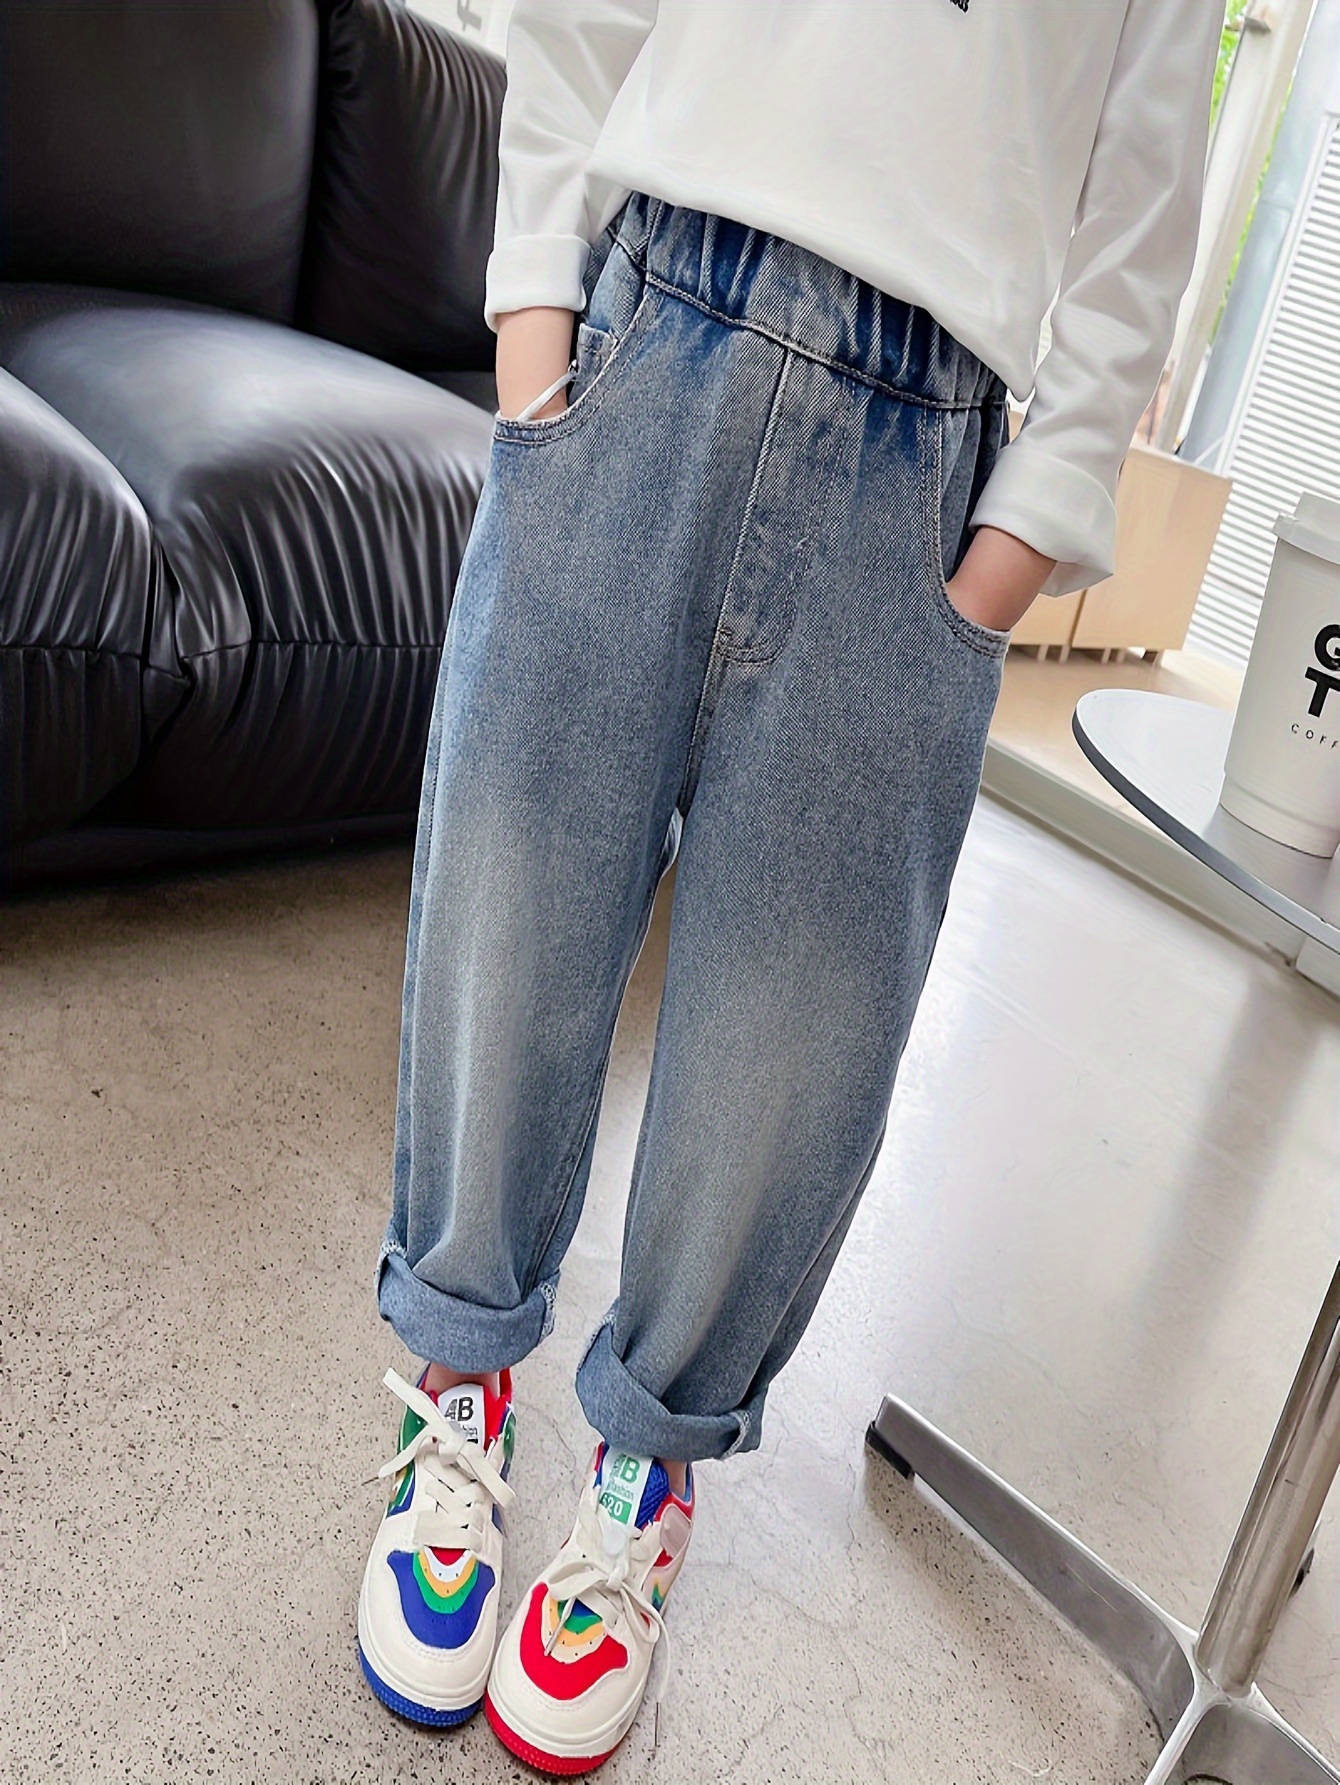 Over The Rainbow Denim Pants in blue